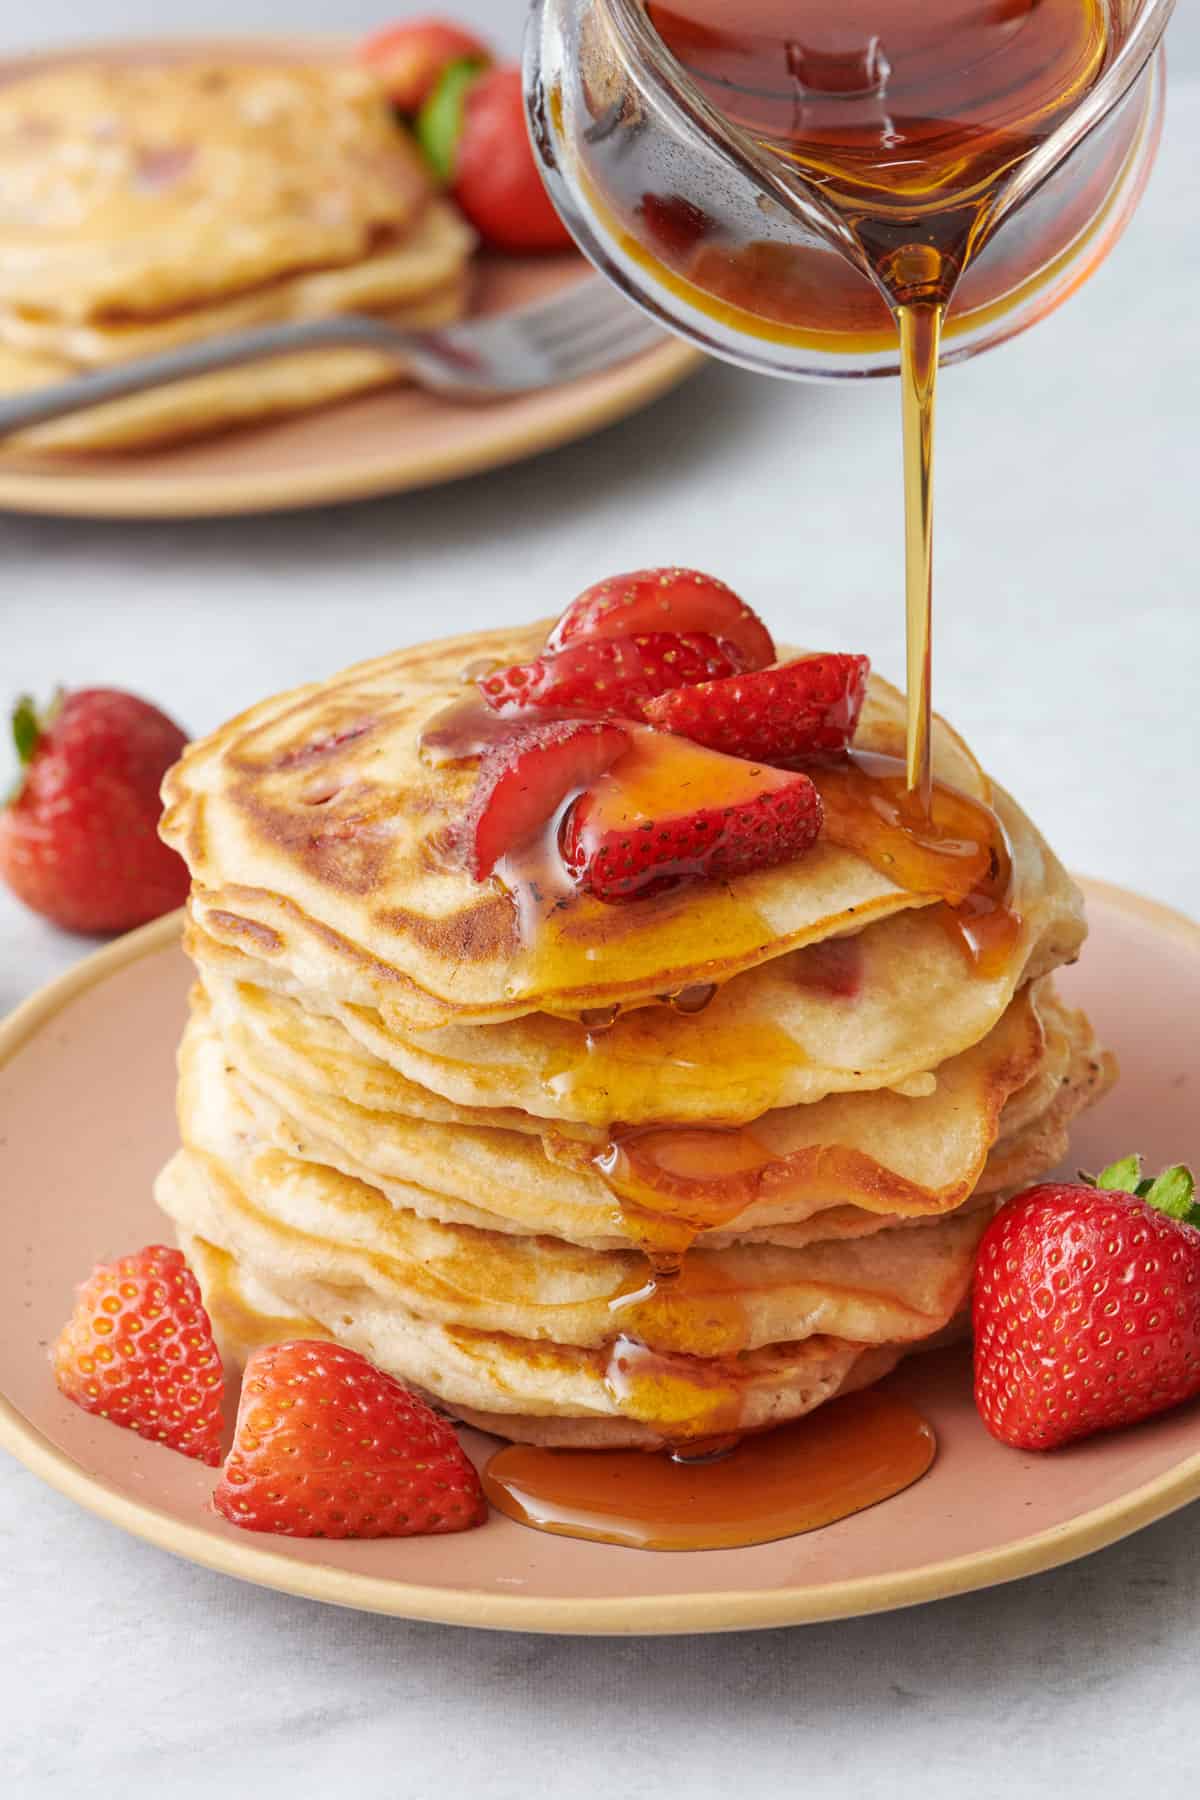 Pouring maple syrup on top of a stack of fresh strawberry pancakes.